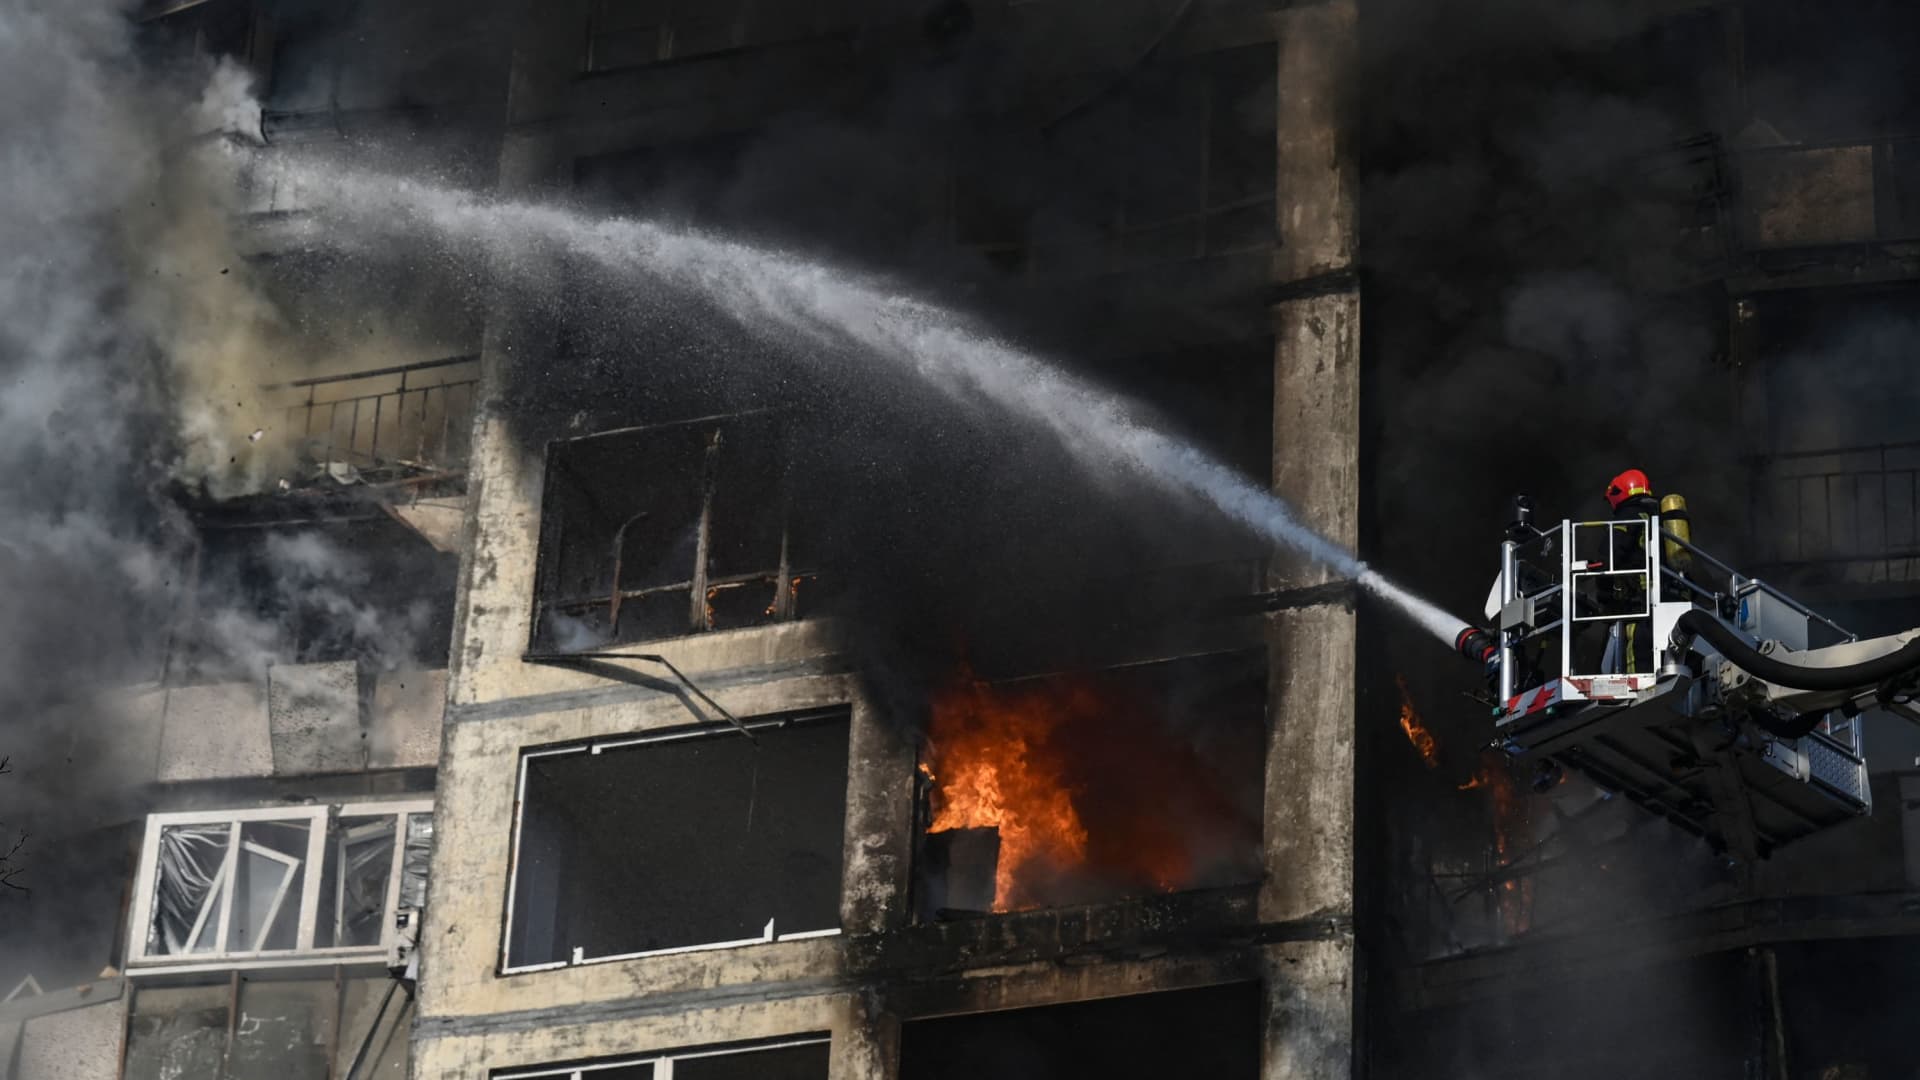 Firefighters extinguish a fire in an apartment building in Kyiv on March 15, 2022, after strikes on residential areas killed at least two people, Ukraine emergency services said as Russian troops intensified their attacks on the Ukrainian capital.